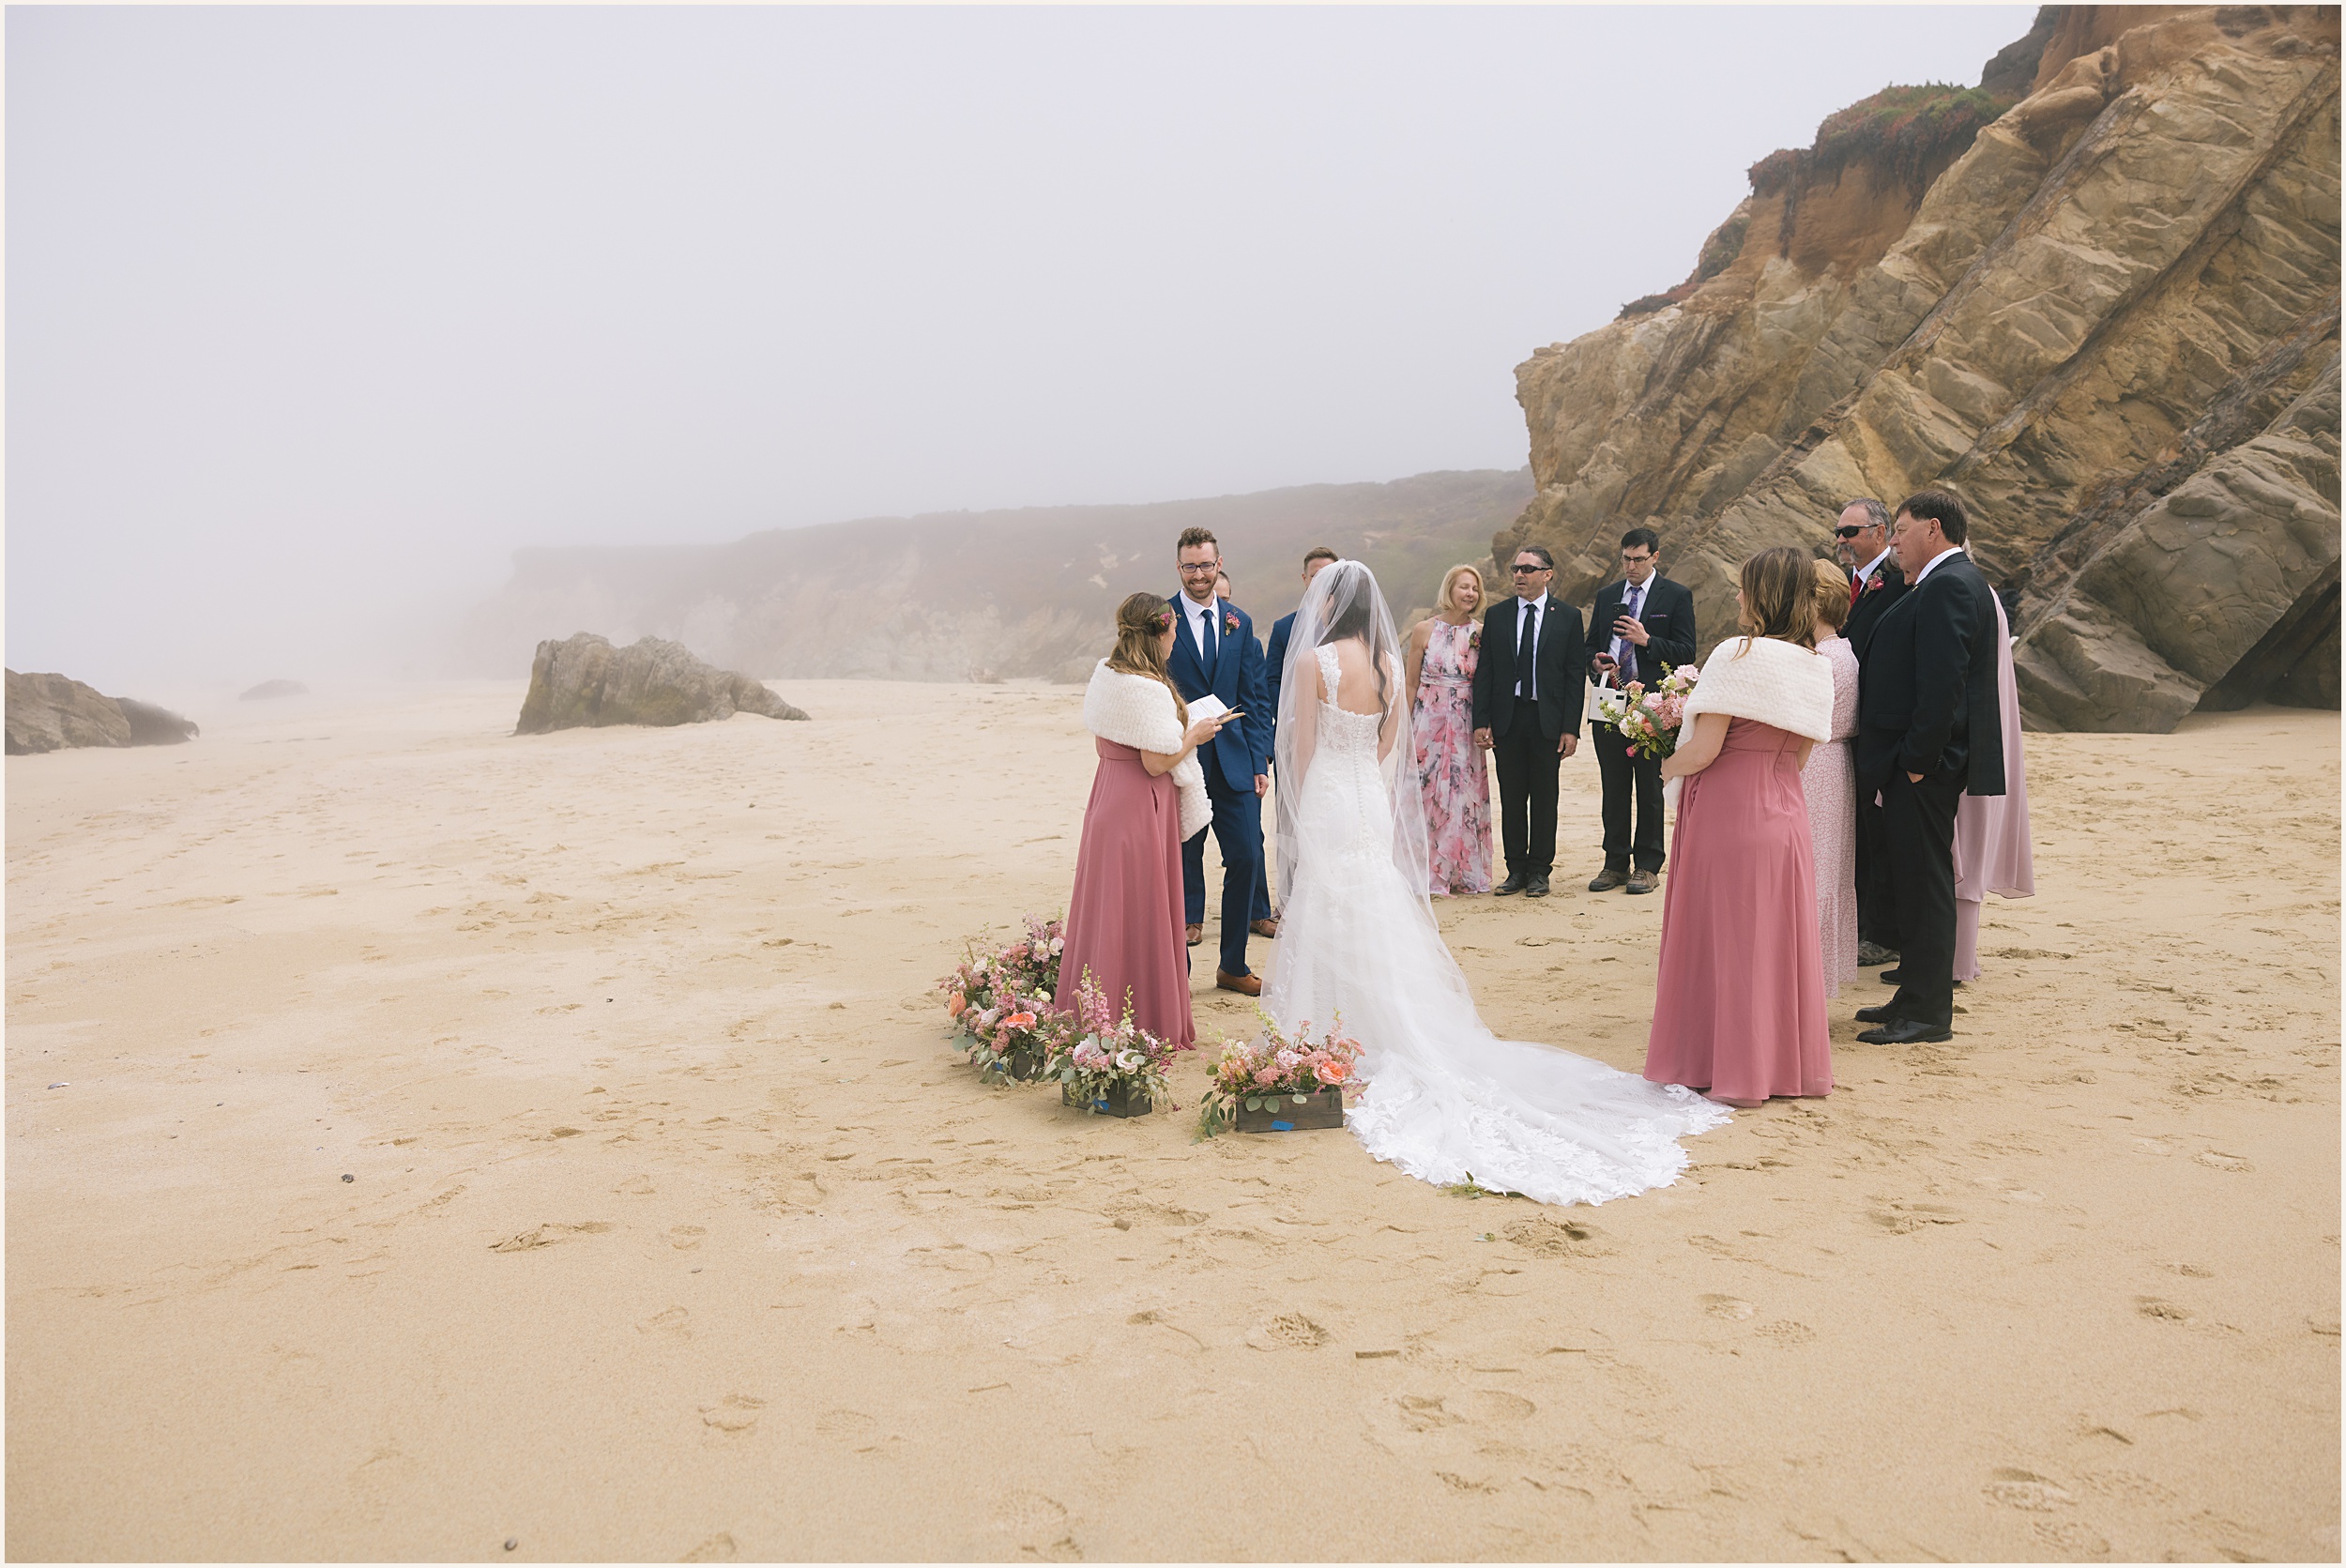 Kelsey-and-Ben-74 Charming Carmel-By-The-Sea Intimate Wedding